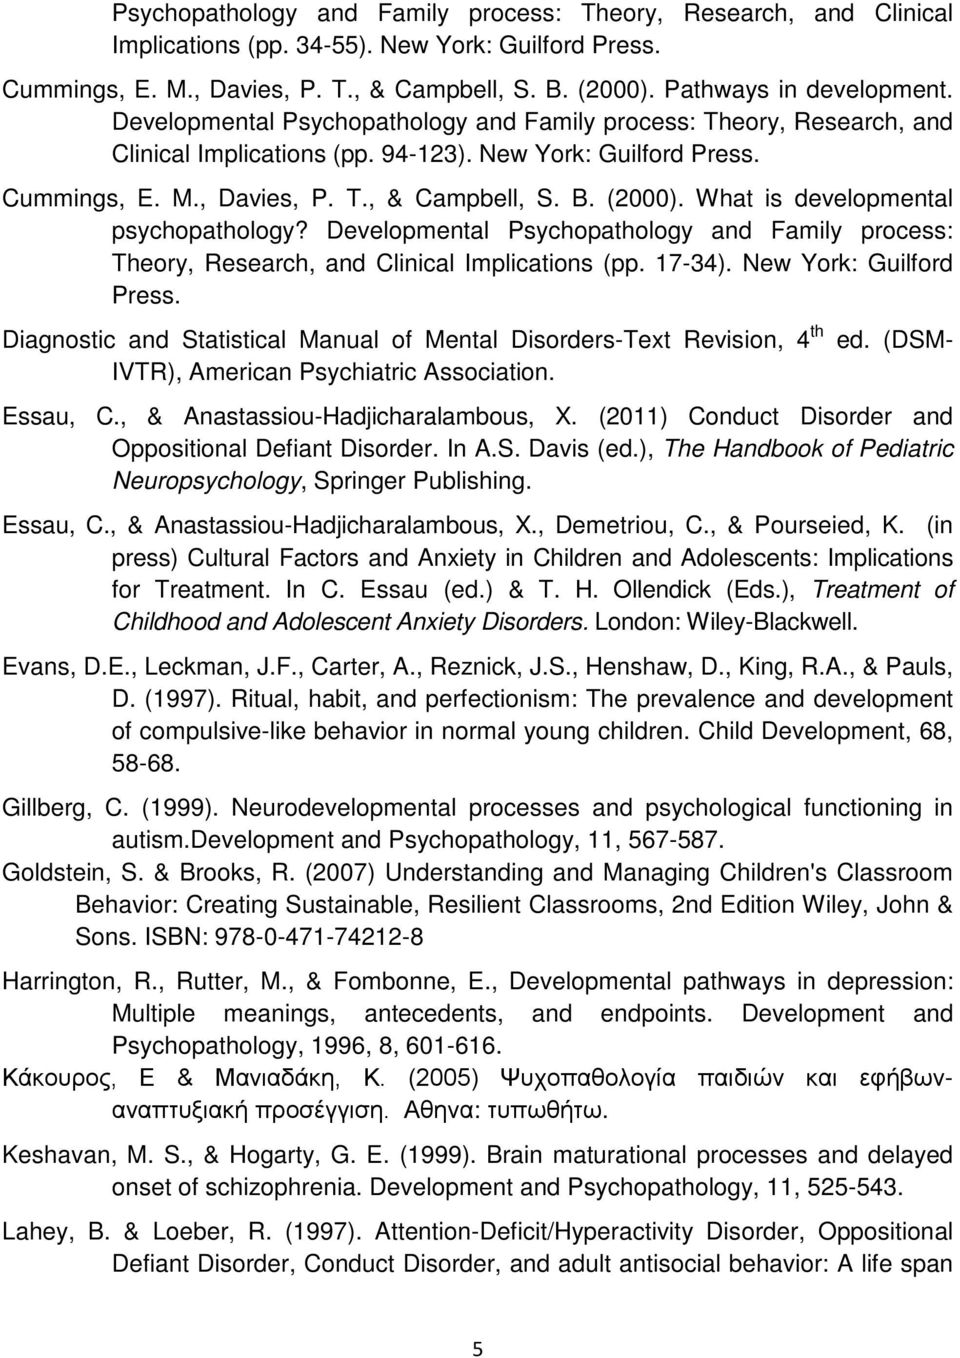 B. (2000). What is developmental psychopathology? Developmental Psychopathology and Family process: Theory, Research, and Clinical Implications (pp. 17-34). New York: Guilford Press.